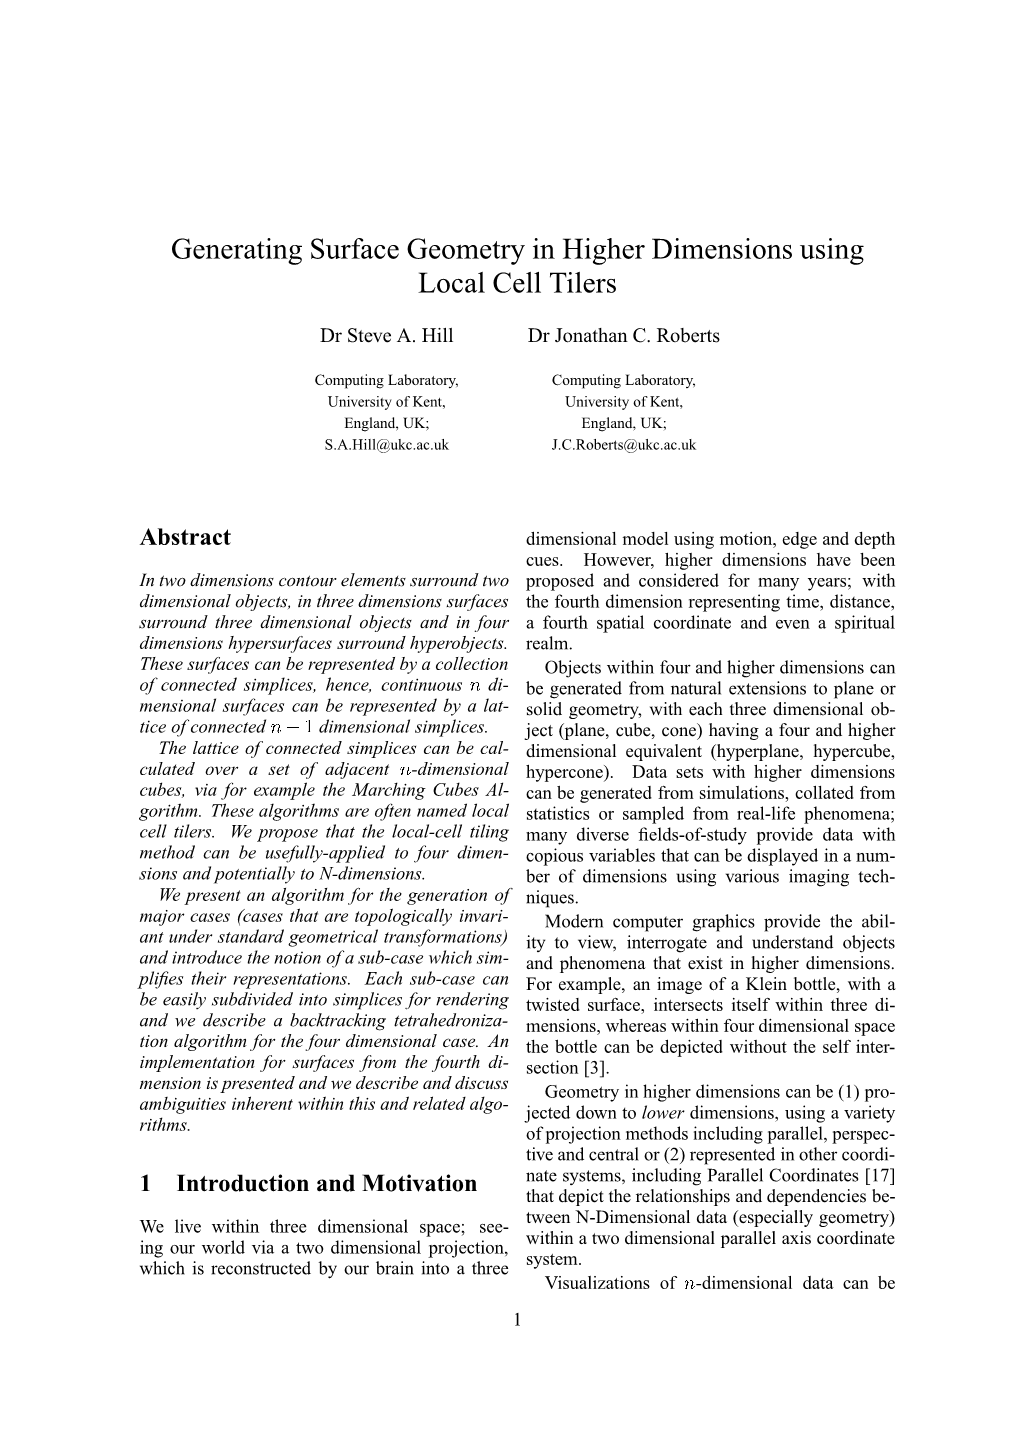 Generating Surface Geometry in Higher Dimensions Using Local Cell Tilers